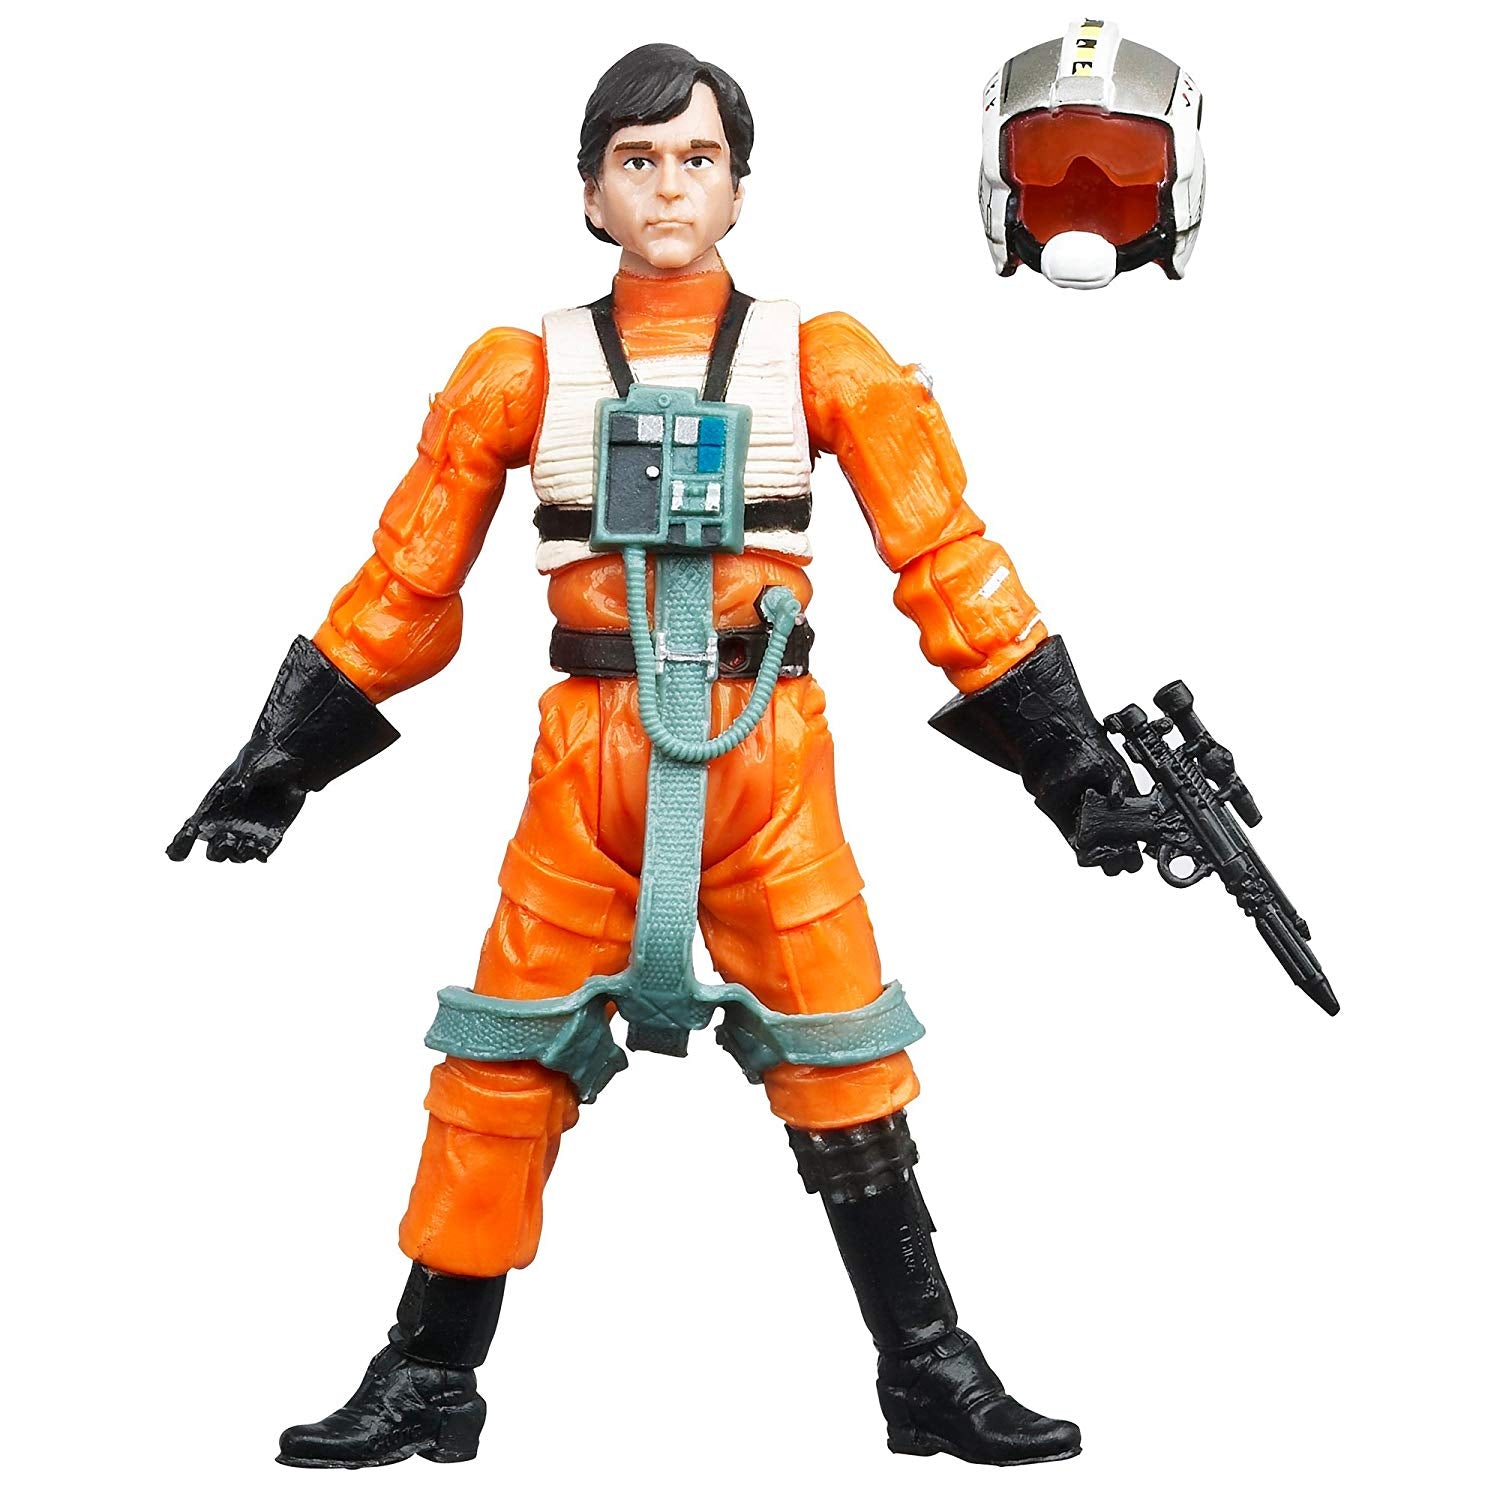 Star Wars Return of the Jedi The Vintage Collection Wedge Antilles 3.75 Figure